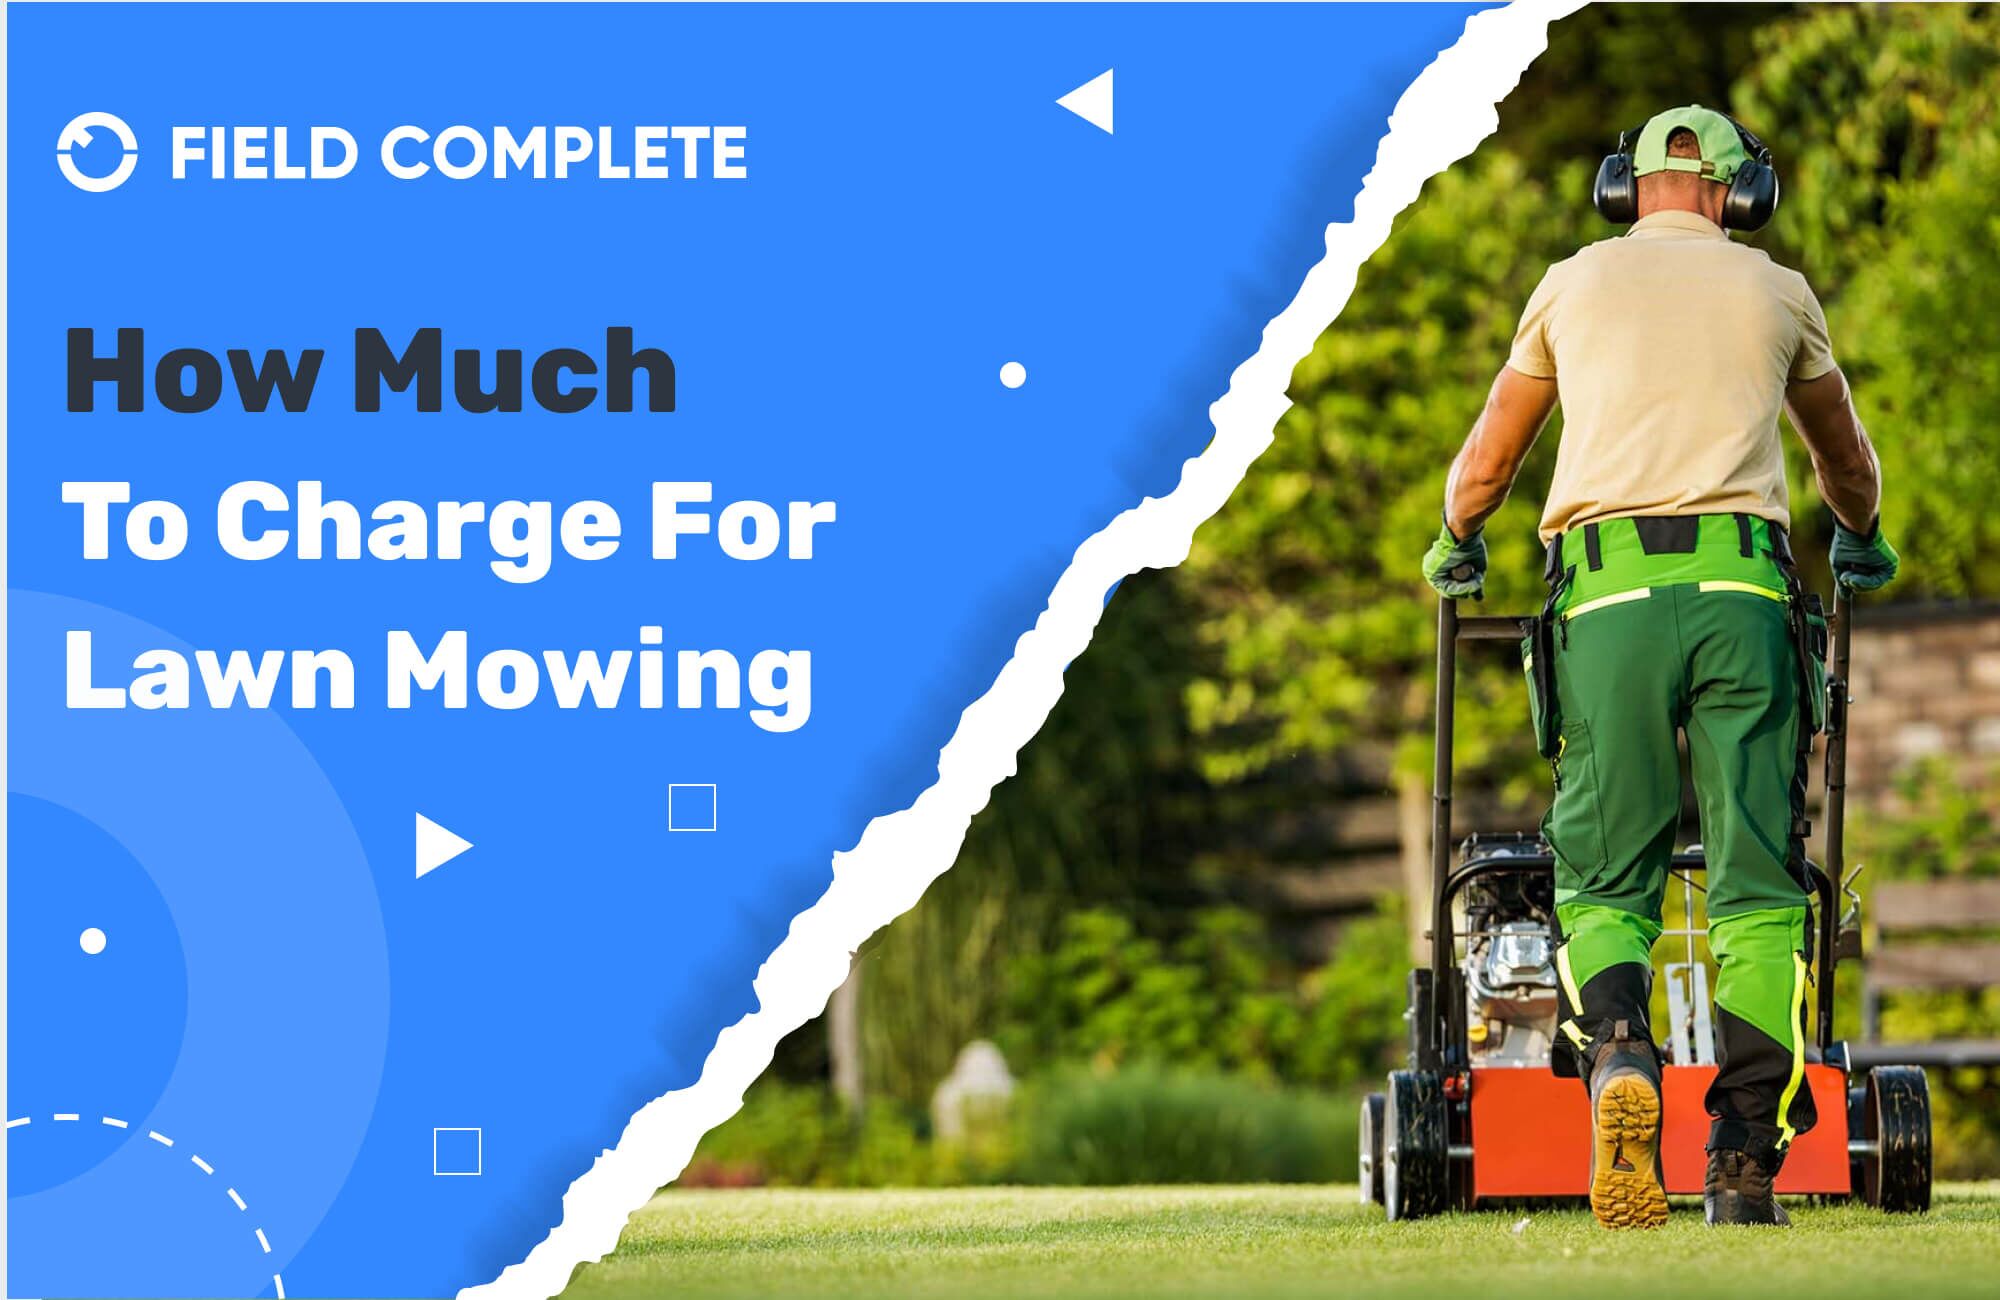 Lawn Сare Pricing Chart. How Much to Charge for Lawn Mowing